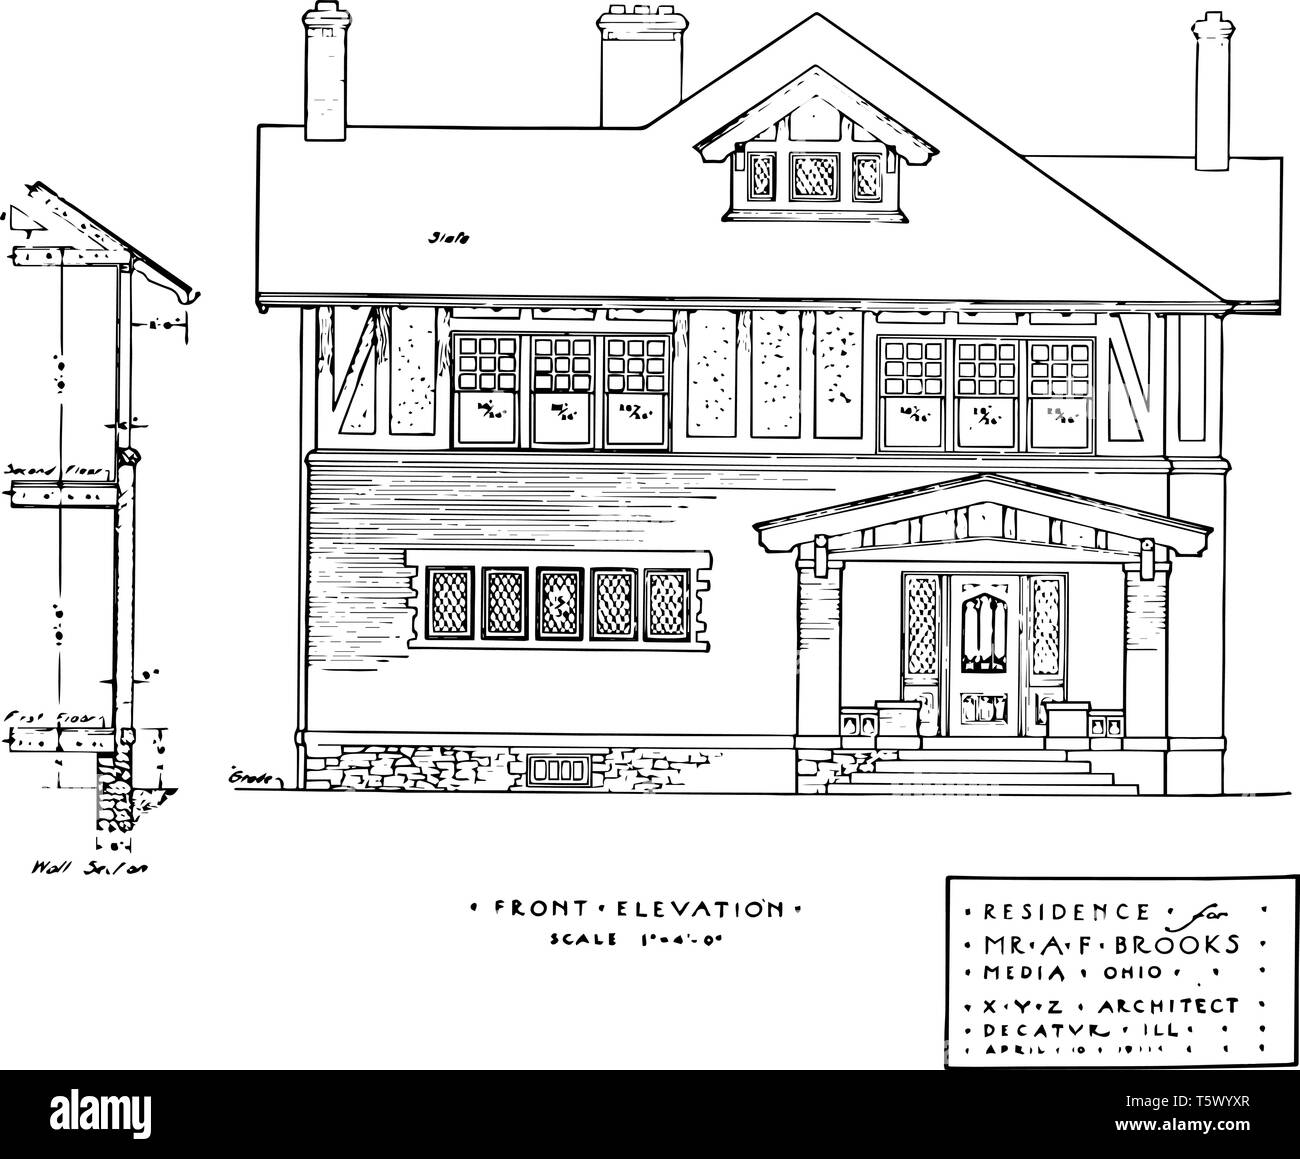 Resident Front Elevation elevations of residential buildings front ...